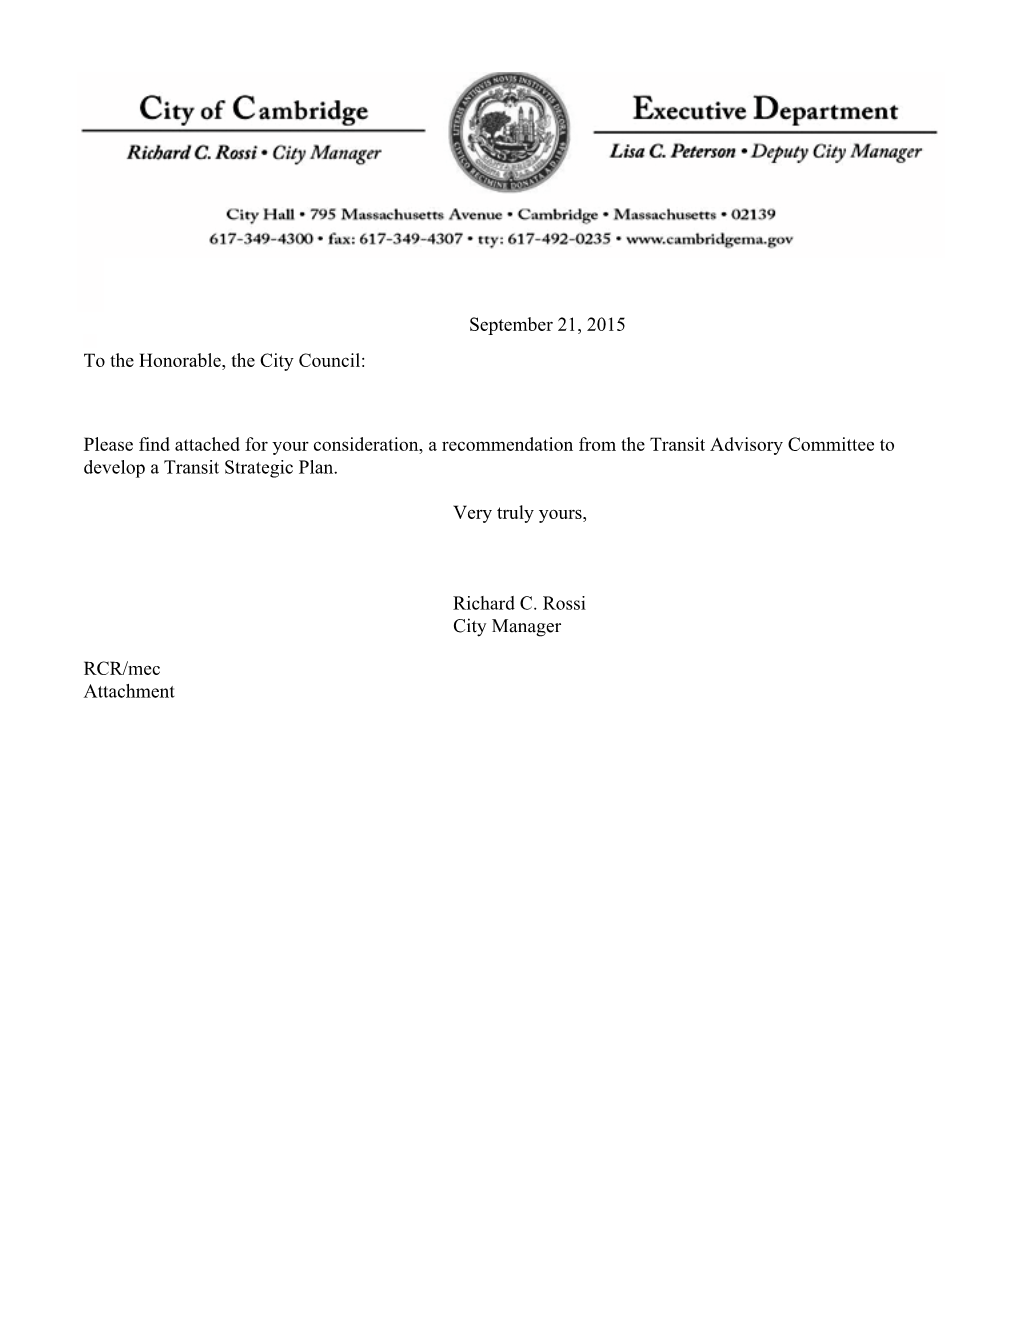 Transportation Committee Attachment.Pdf